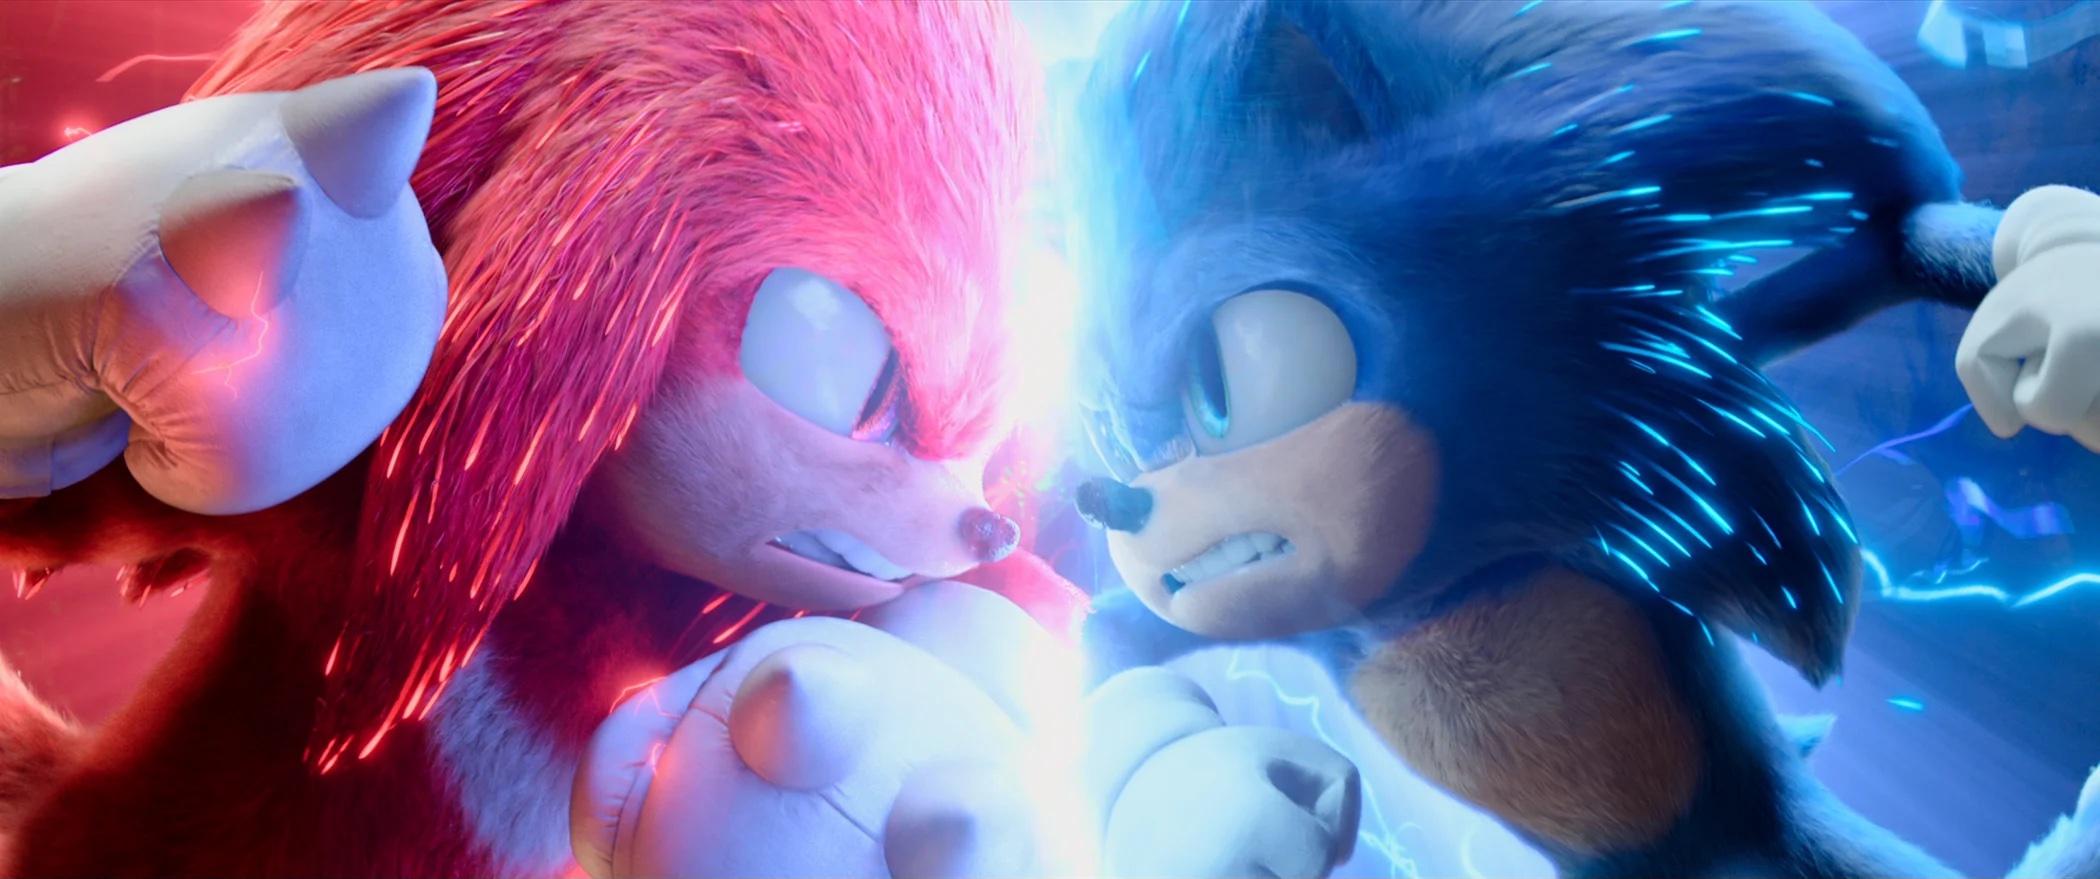 'Sonic the Hedgehog 3' is officially happening at Paramount Pictures.